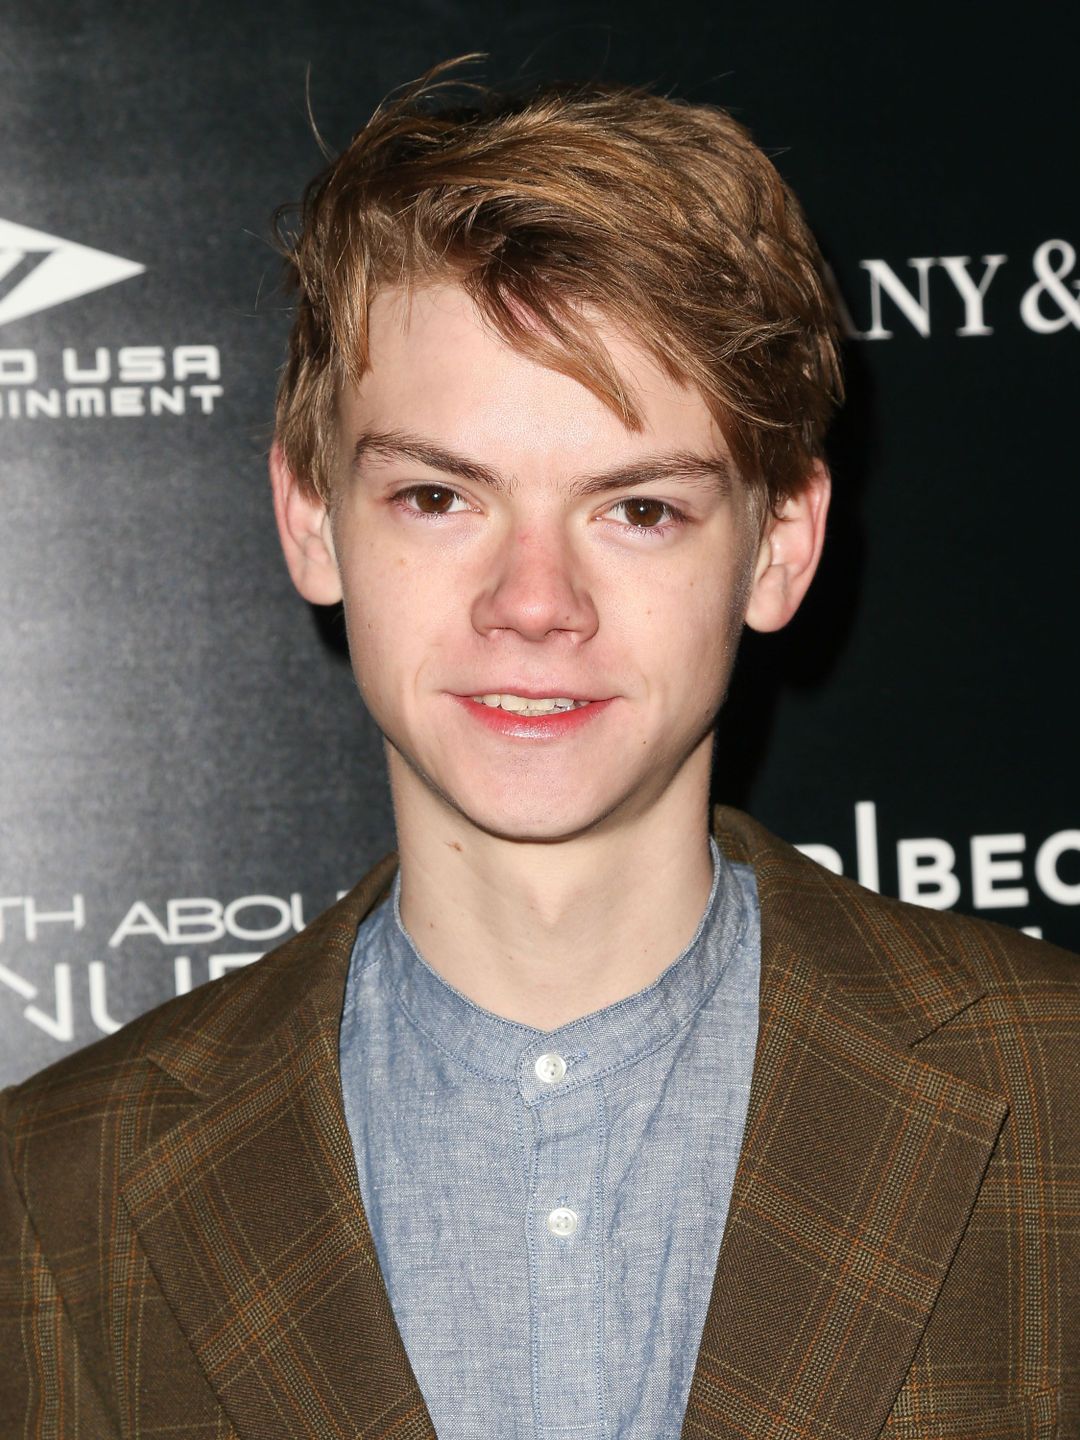 Thomas Sangster early career